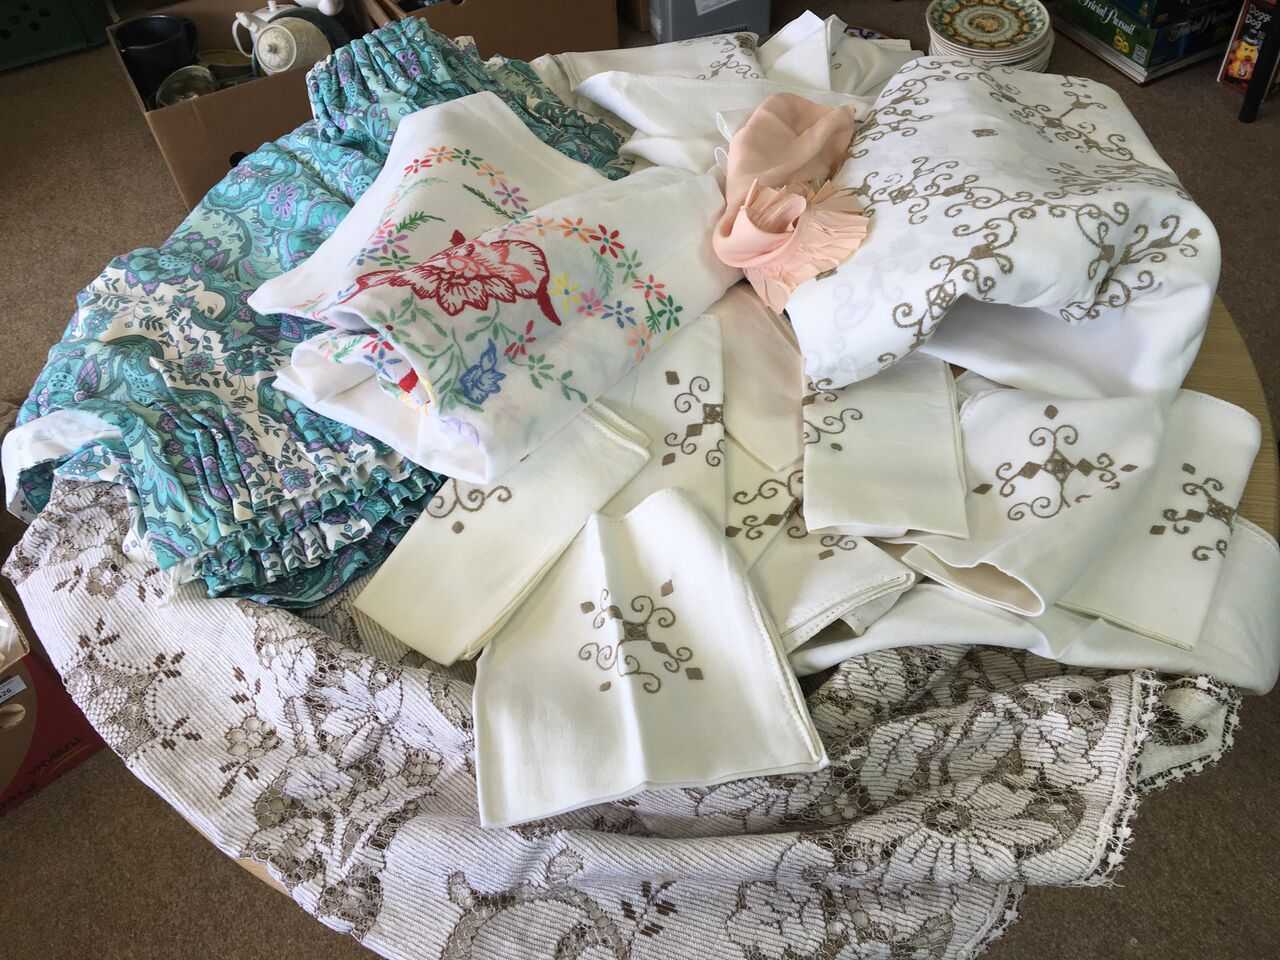 LARGE LOT OF VINTAGE TABLEWARE - MOSTLY EMBROIDERED LINEN TOGETHER WITH A PAIR OF RETRO CURTAINS -